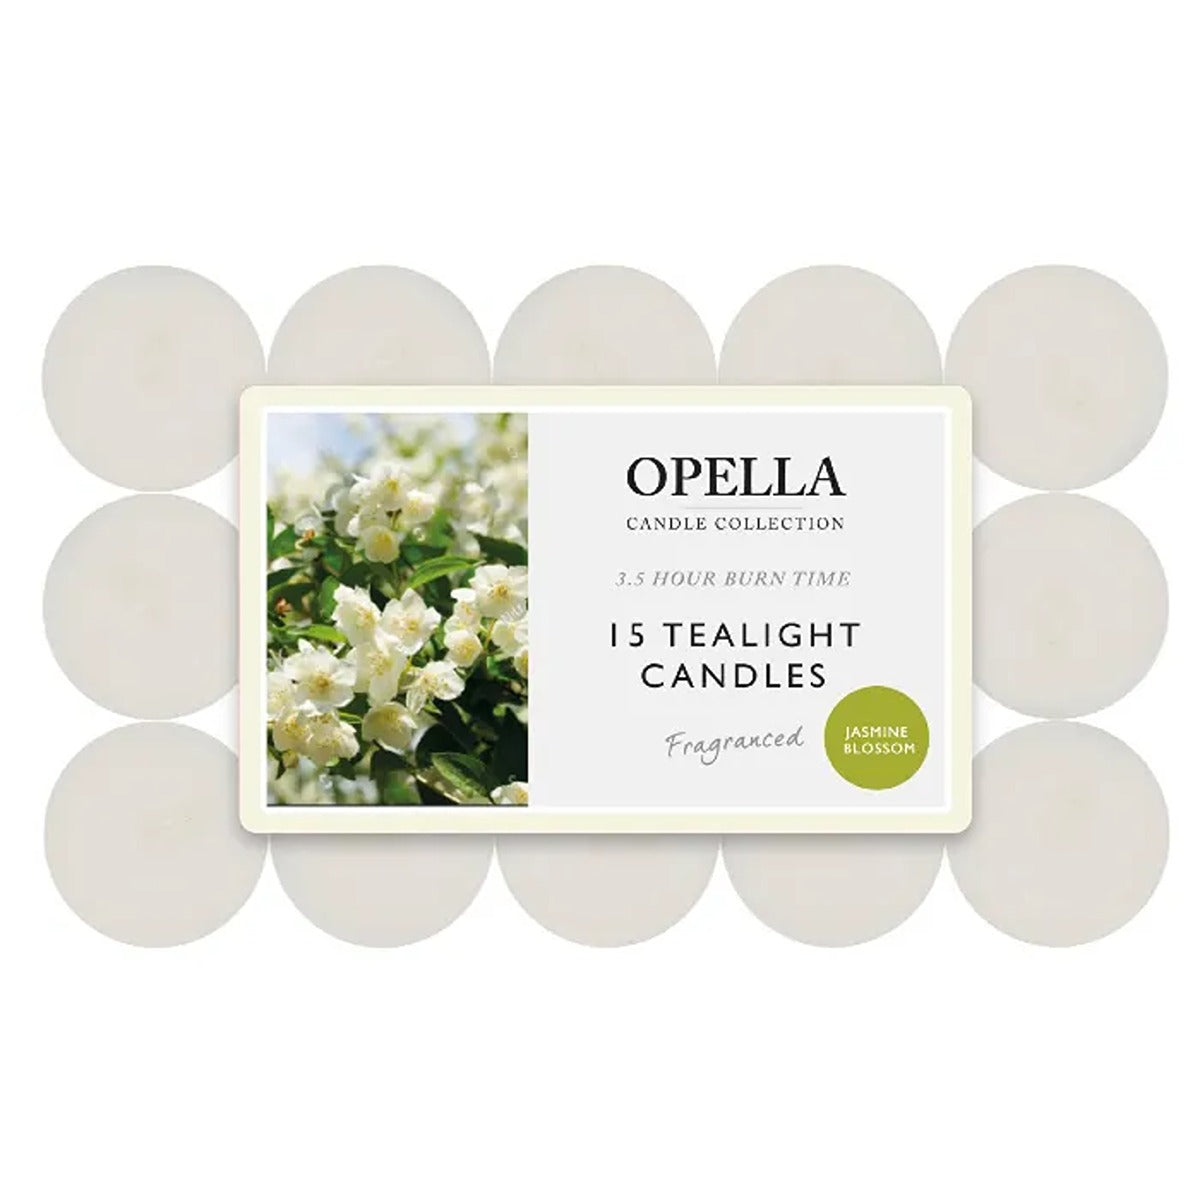 Opella - Jasmine Blossom Scented Tealight Candles - Pack of 15 - Continental Food Store